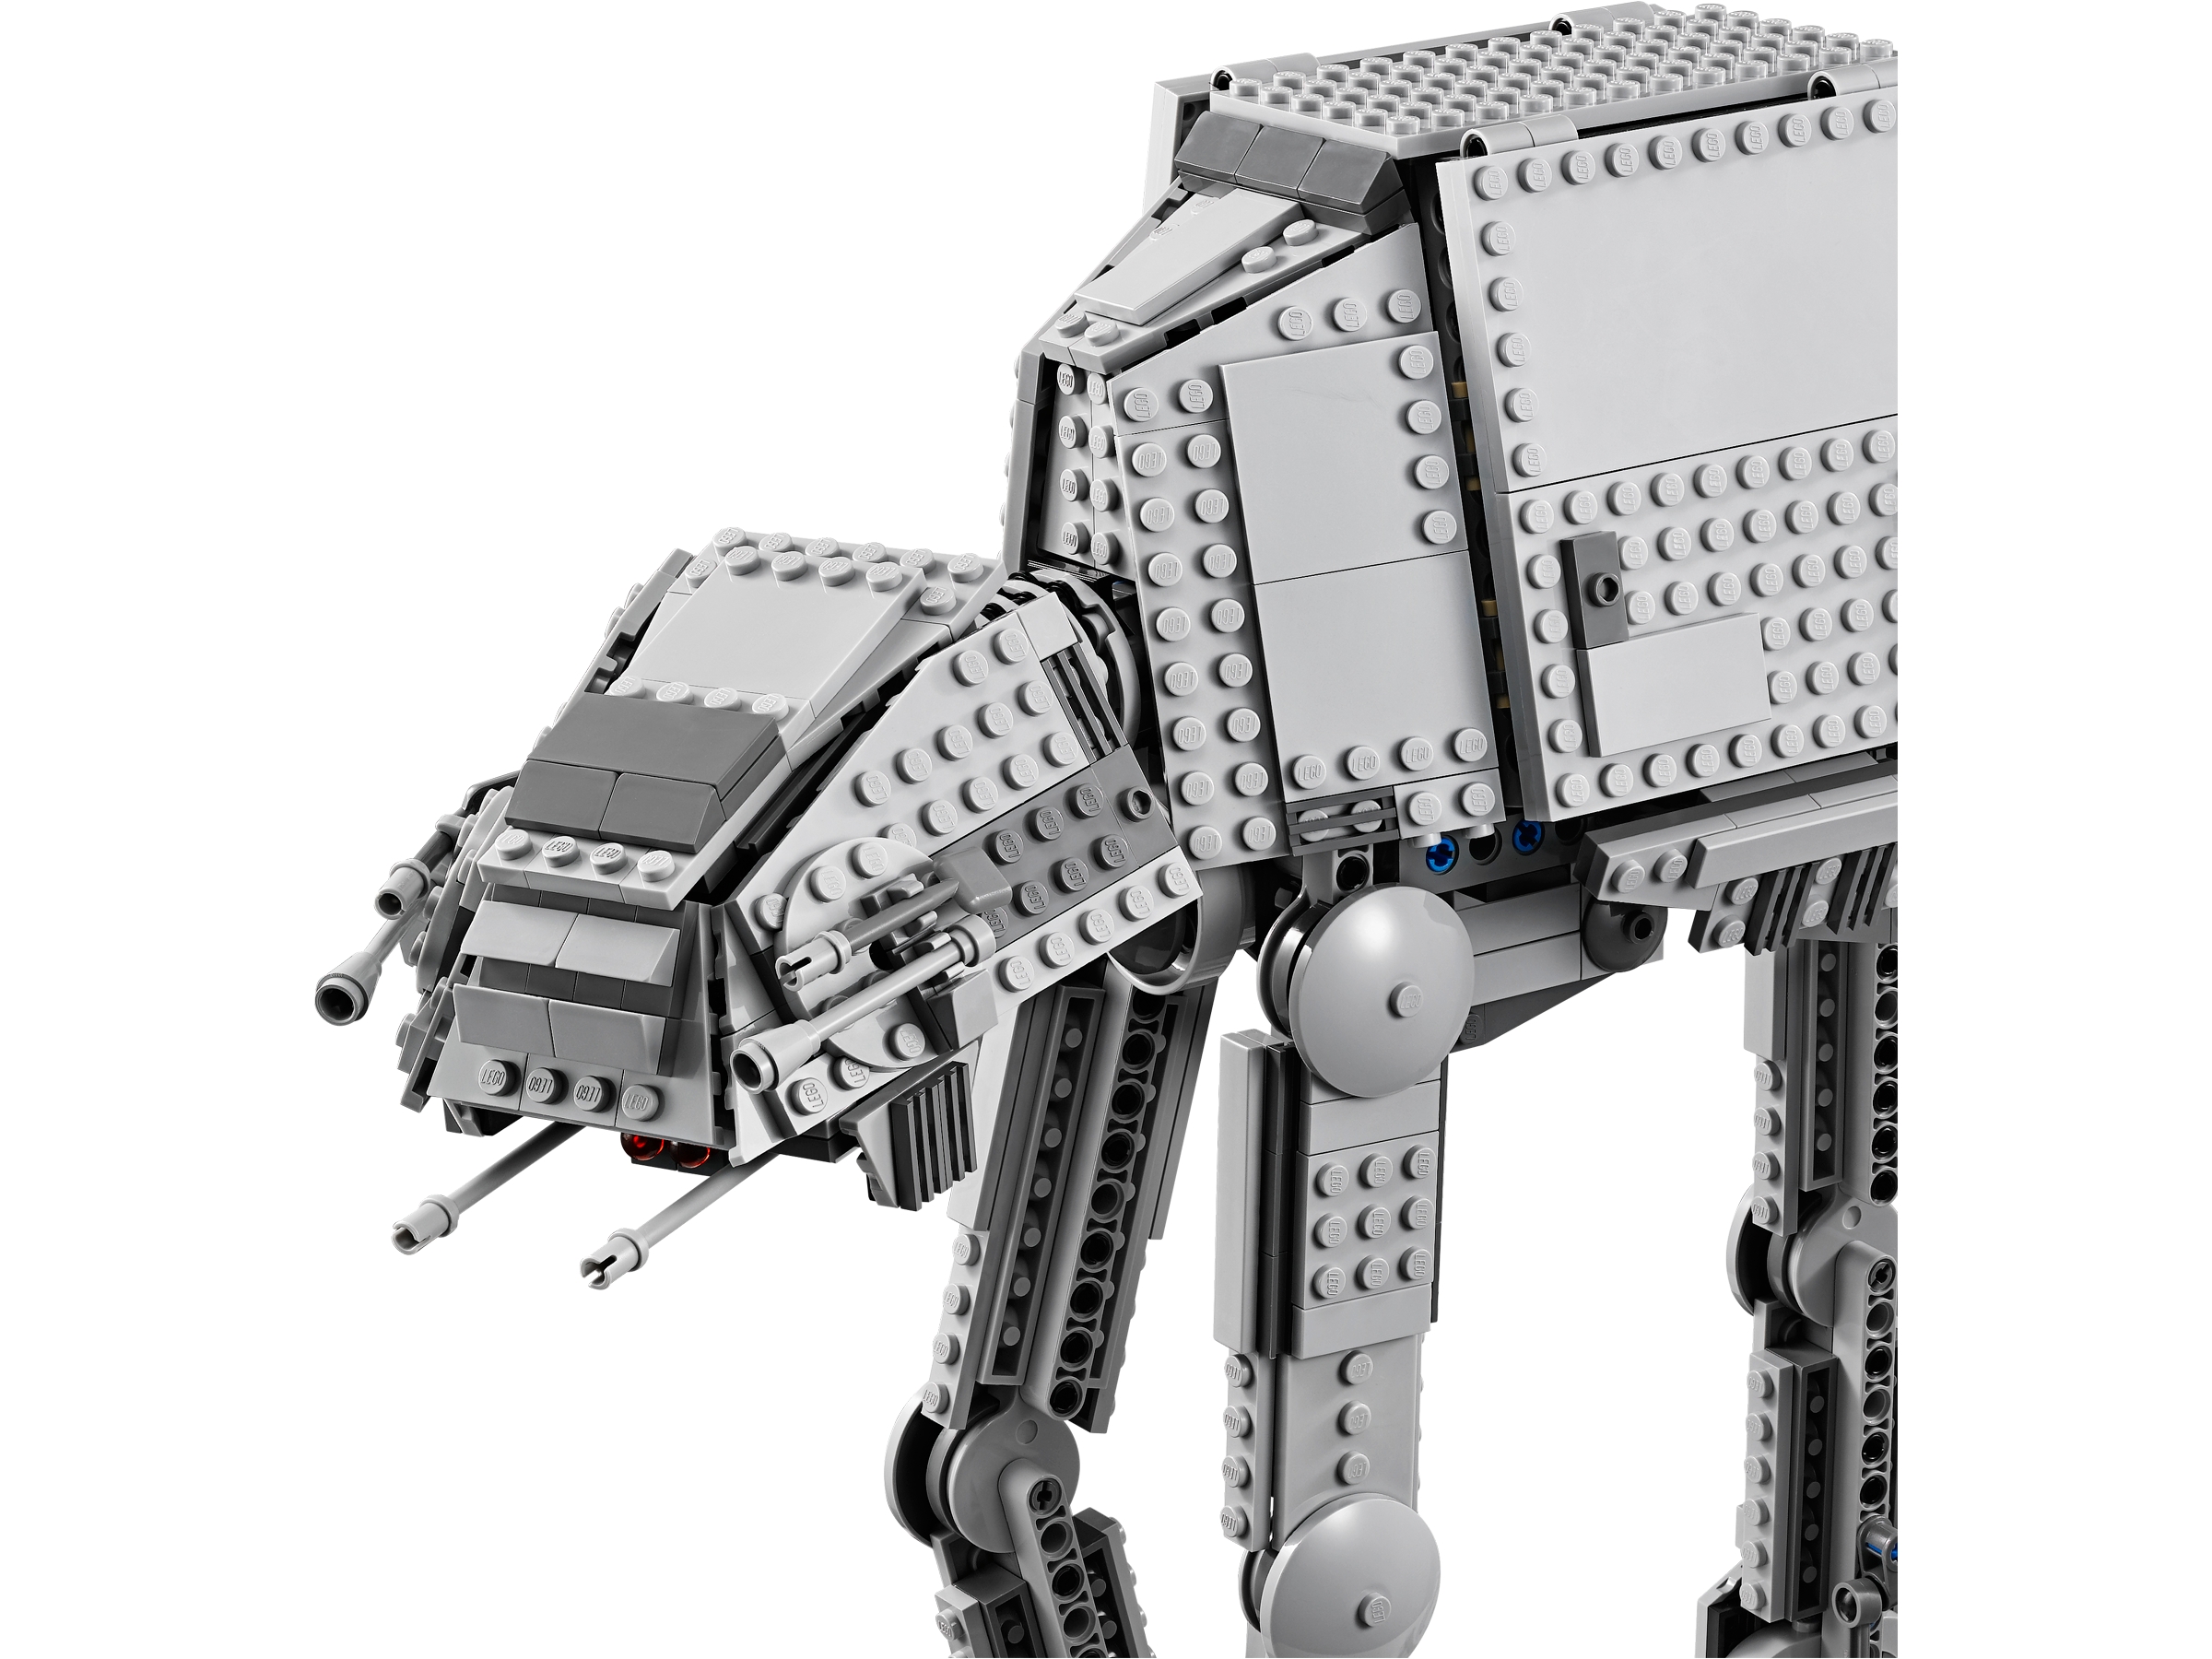 LEGO Star Wars AT-AT (75054) for sale online